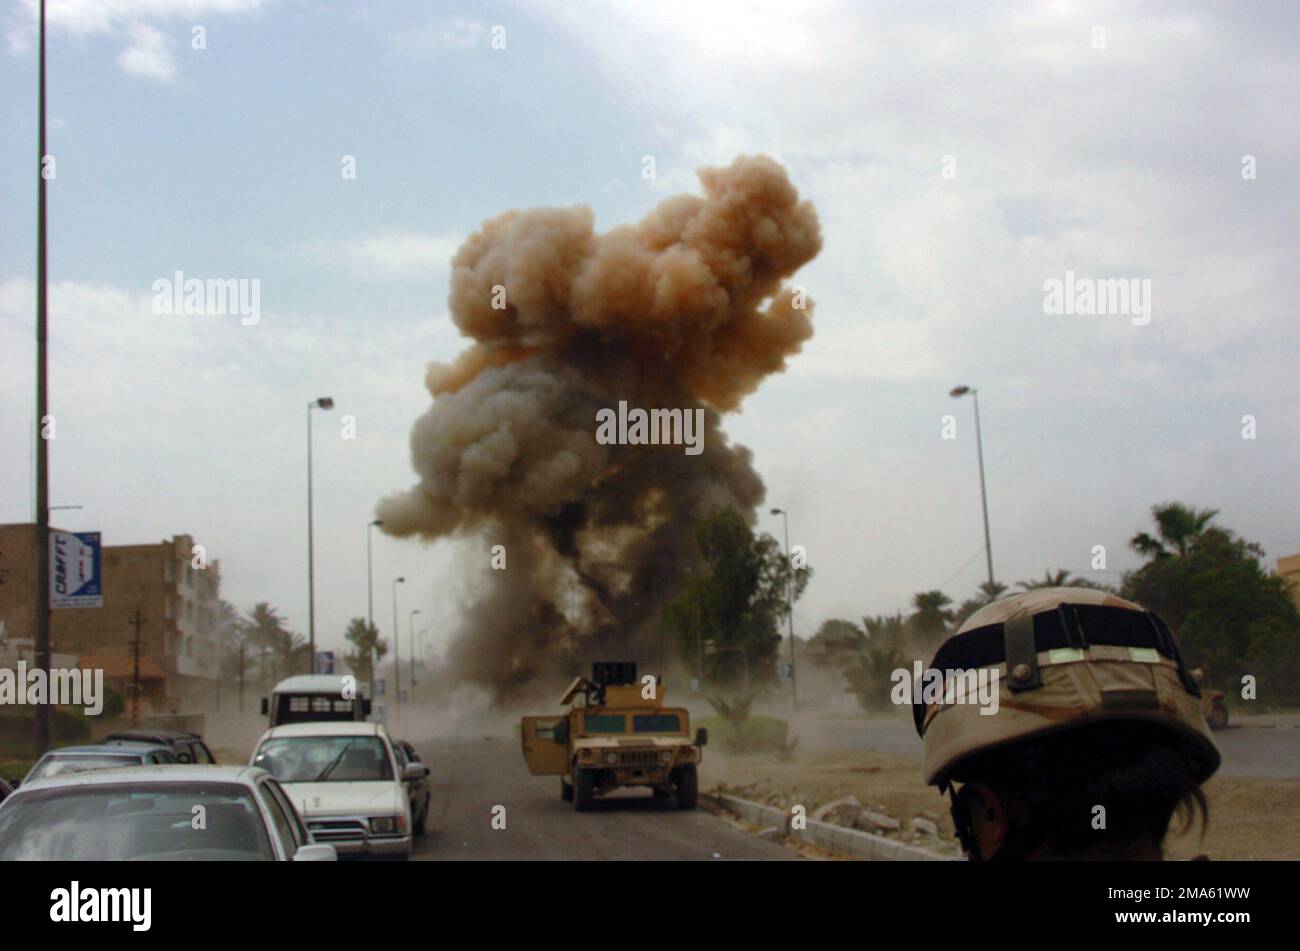 050414-A-3240S-025. Base: Baghdad Country: Iraq (IRQ) Stock Photo